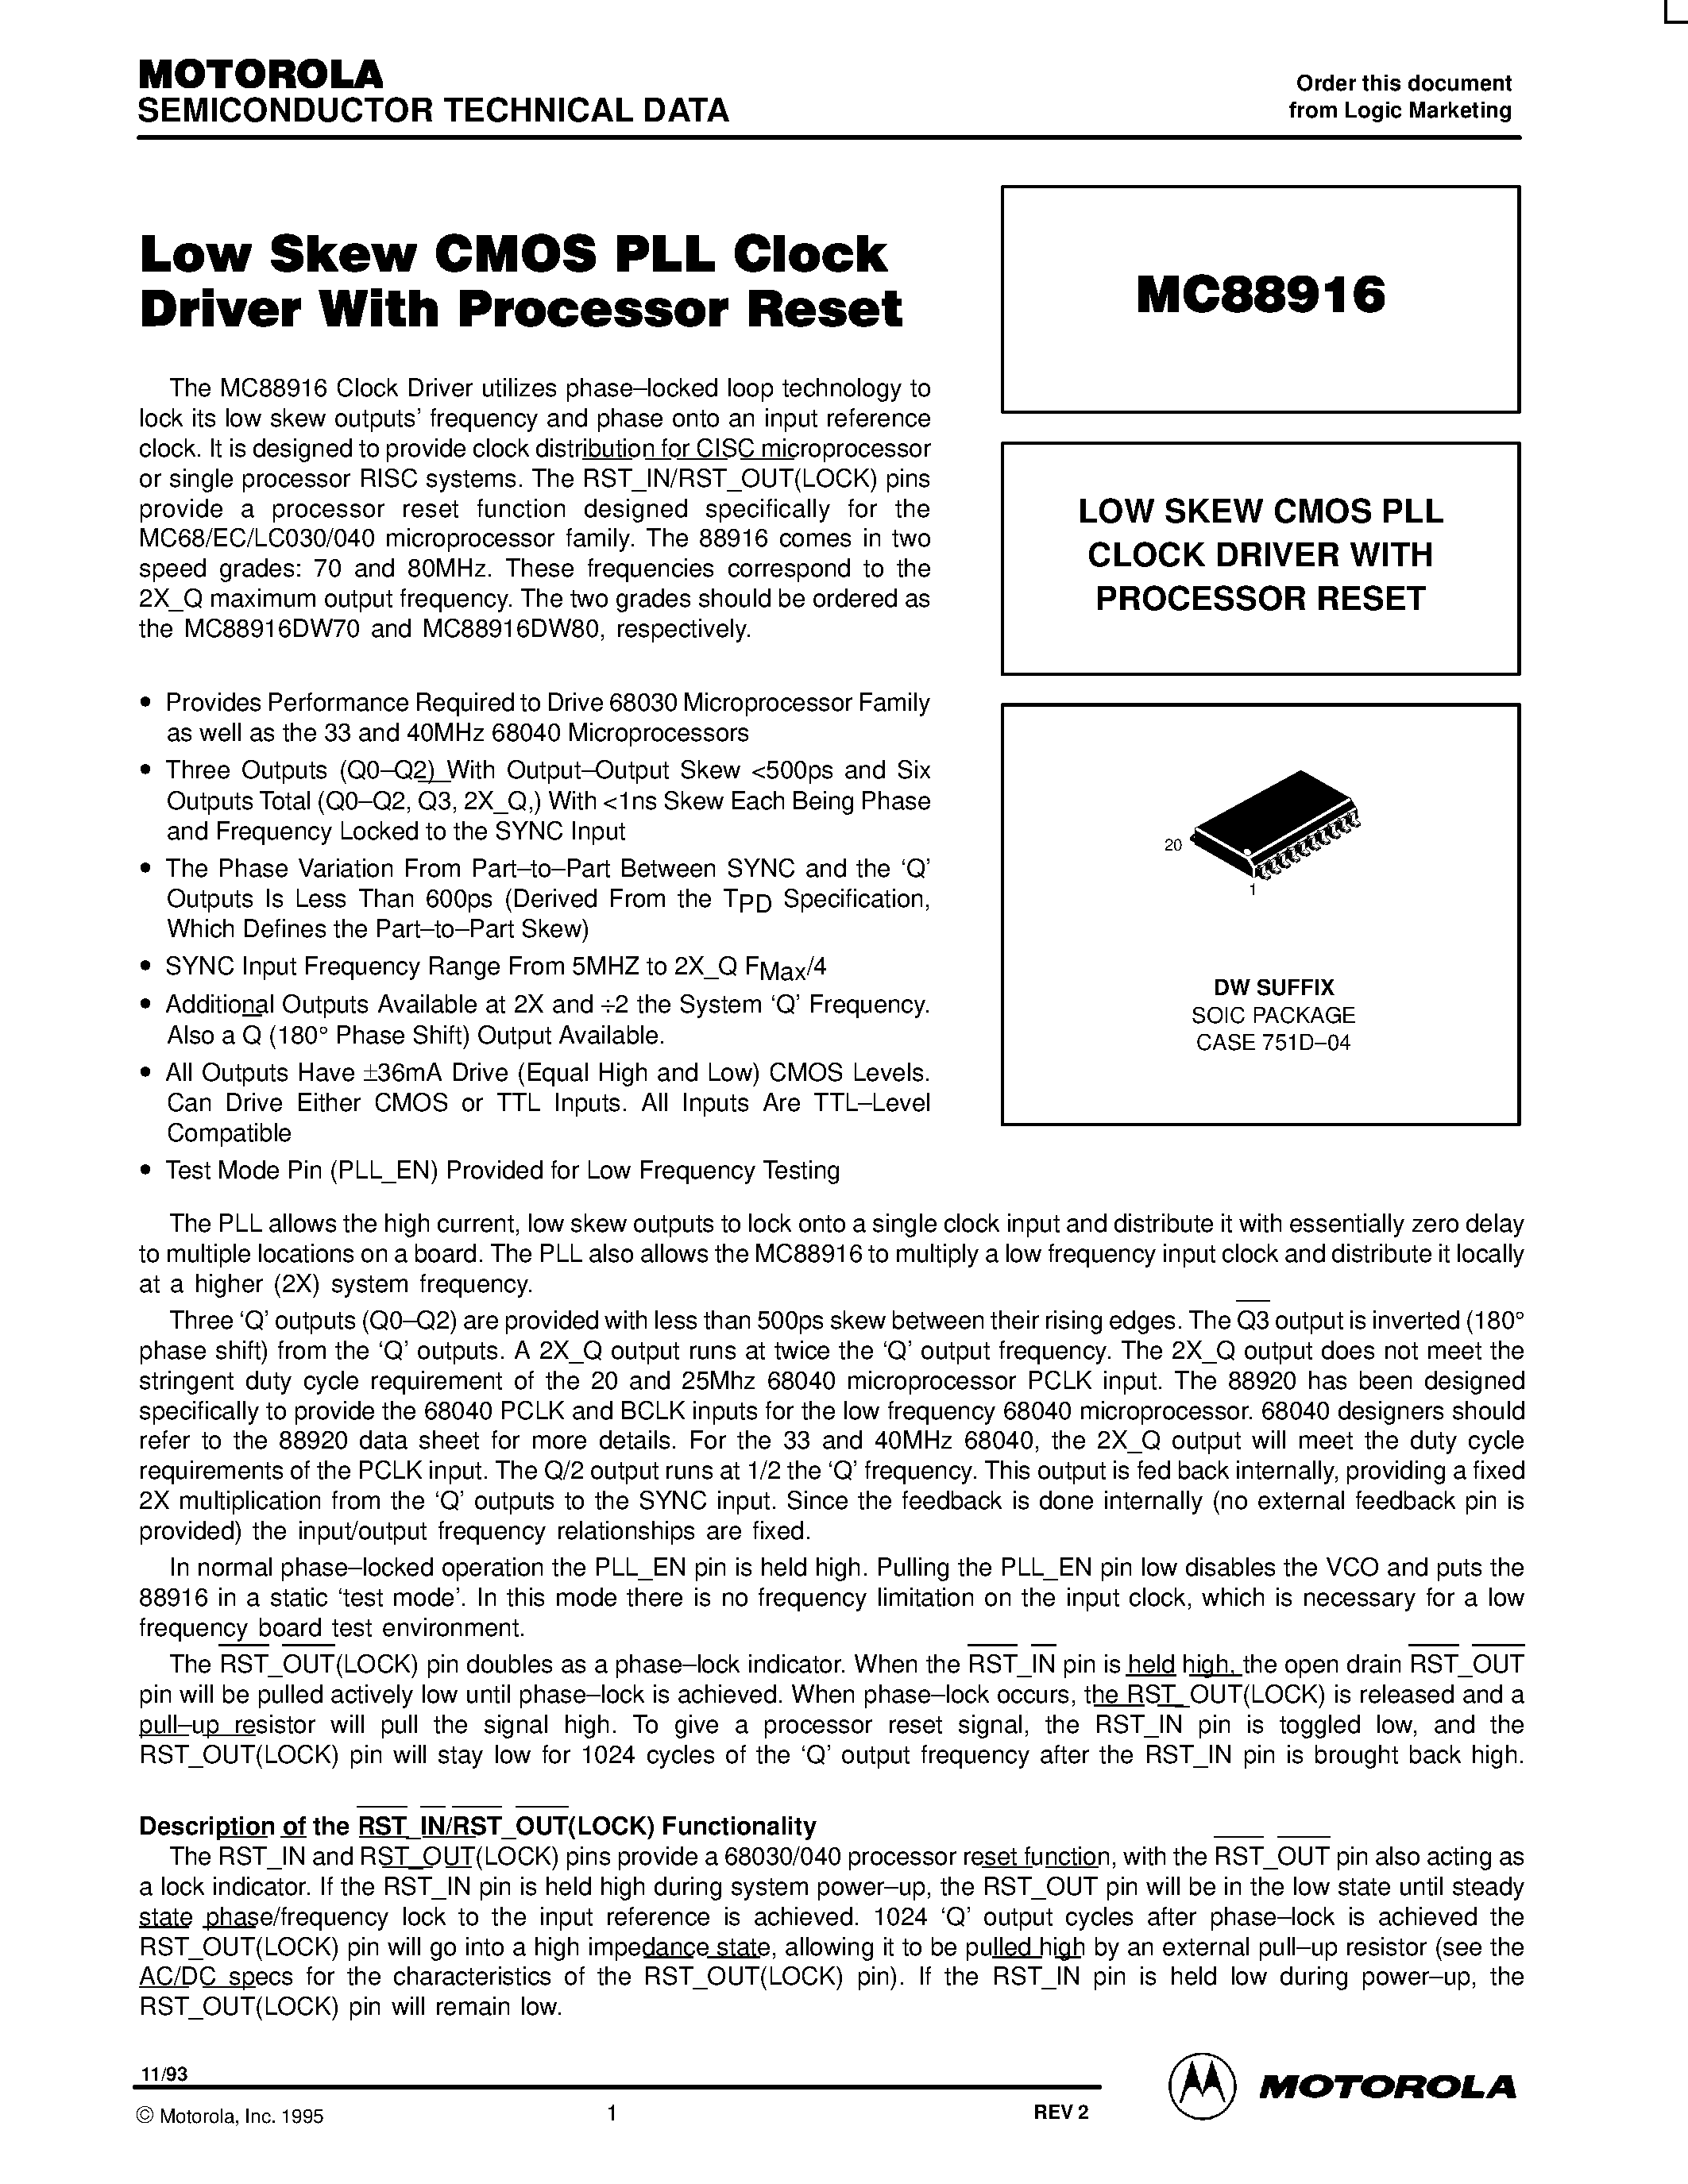 Datasheet MC88916 - LOW SKEW CMOS PLL CLOCK DRIVER WITH PROCESSOR RESET page 1